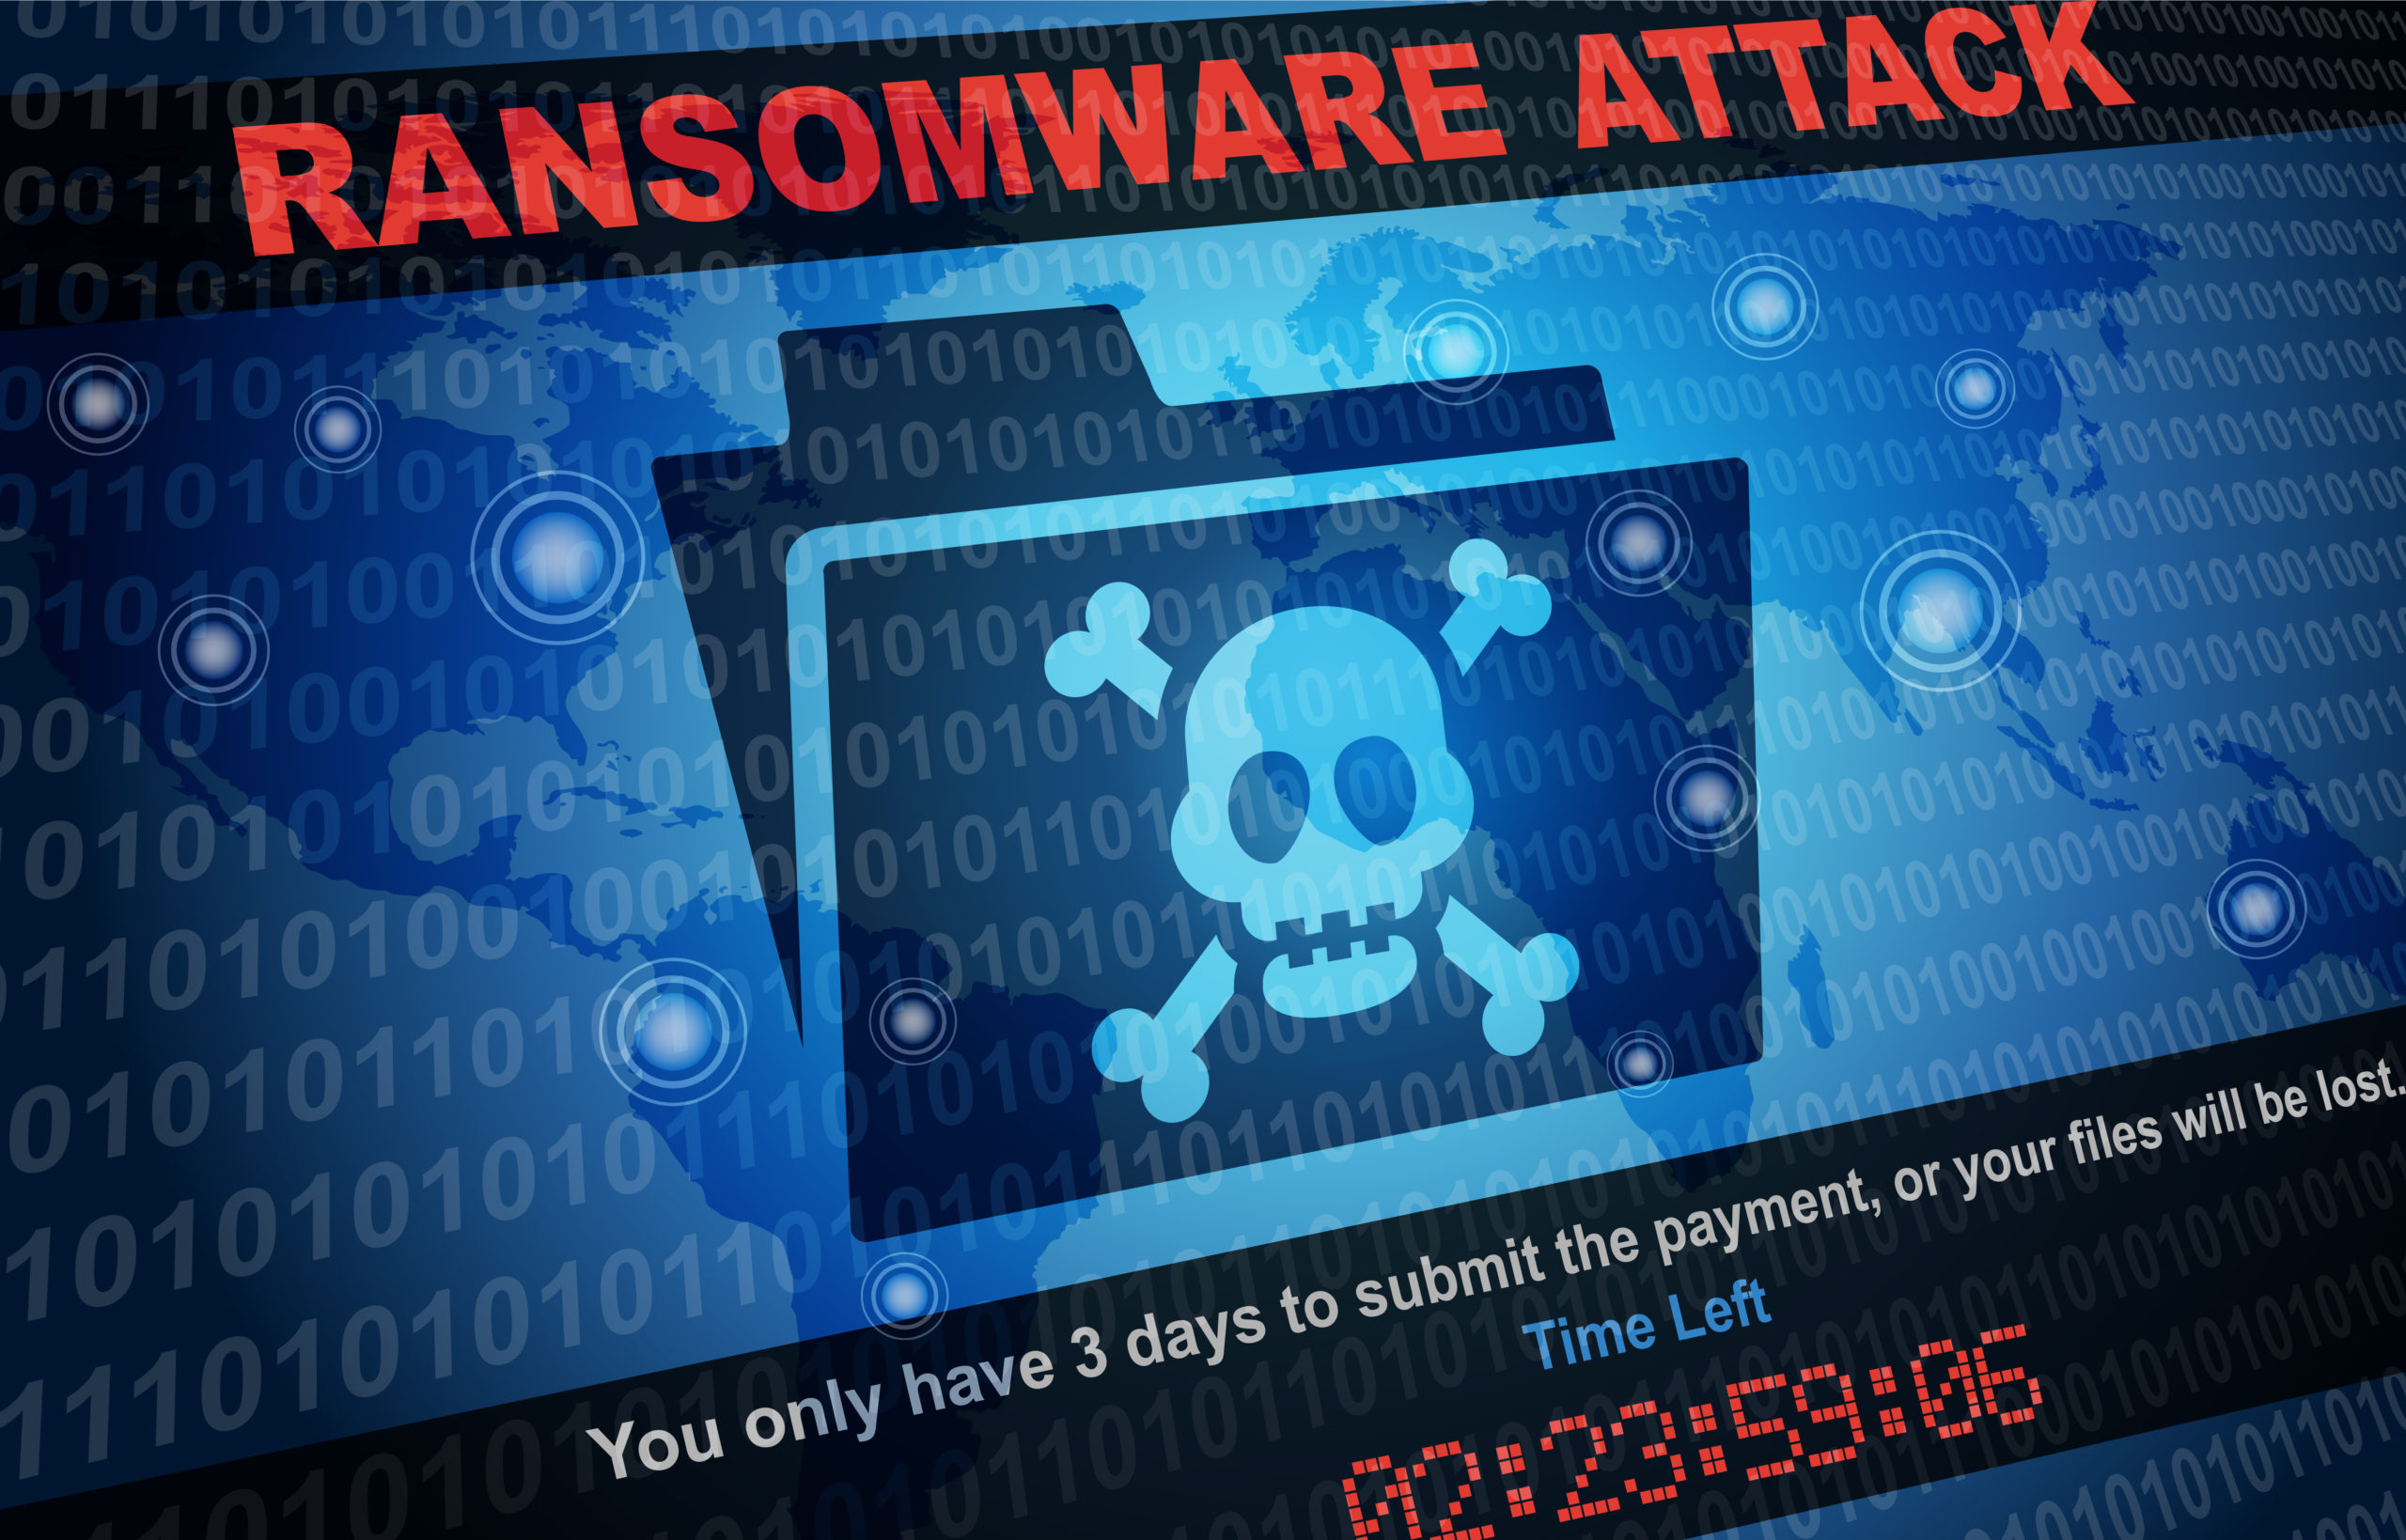 How to Protect Yourself from Ransomware Attacks